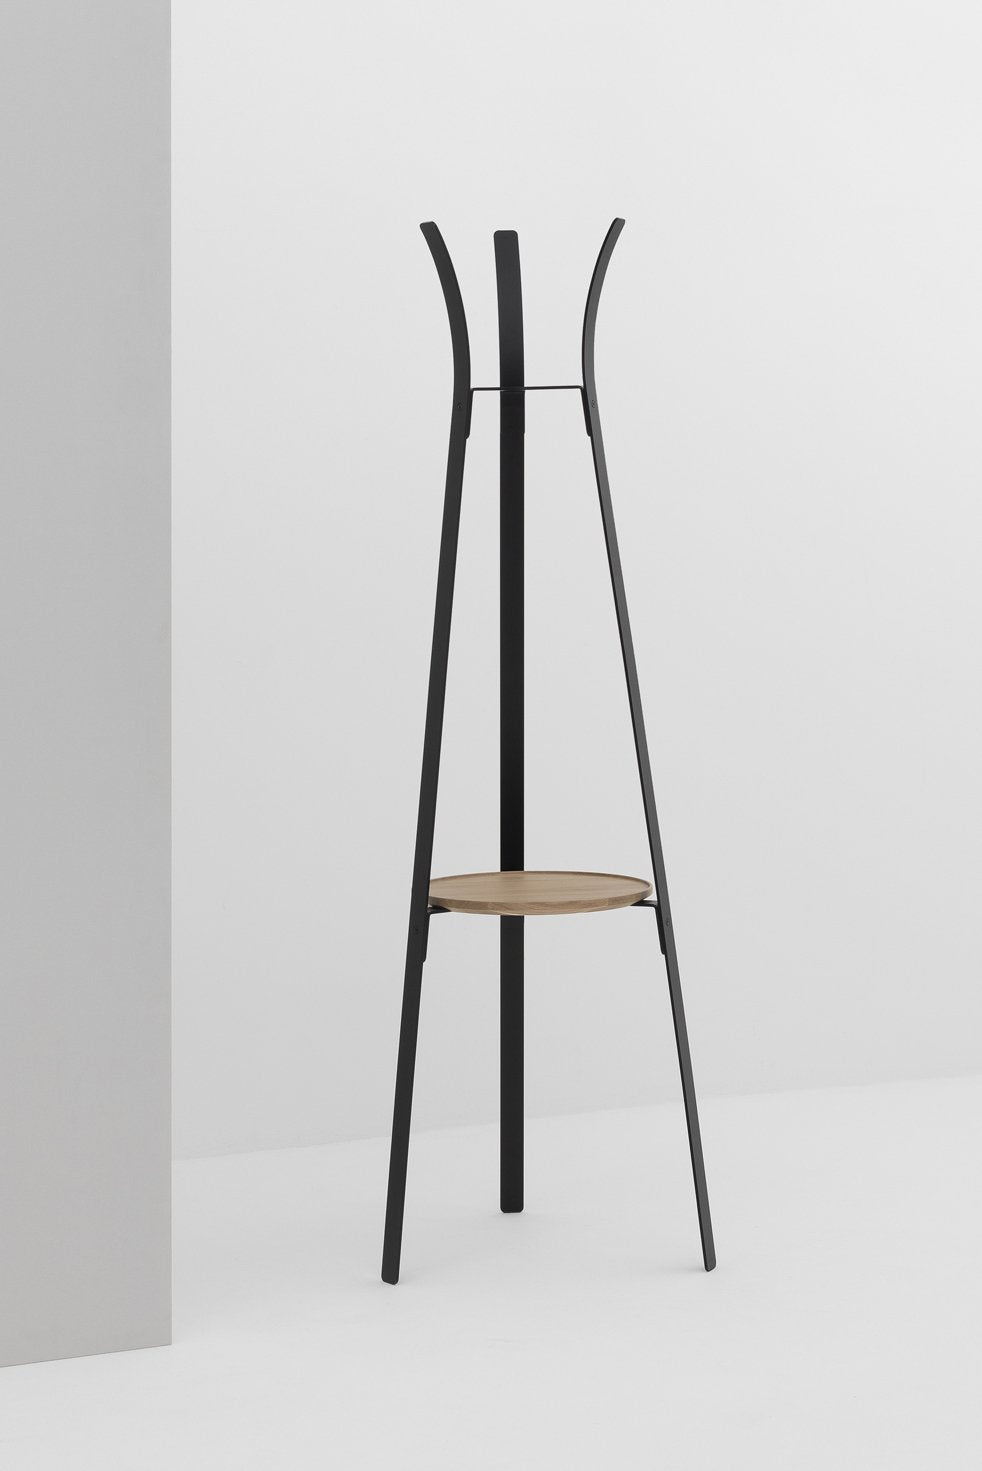 SPRINGBACK coat stand